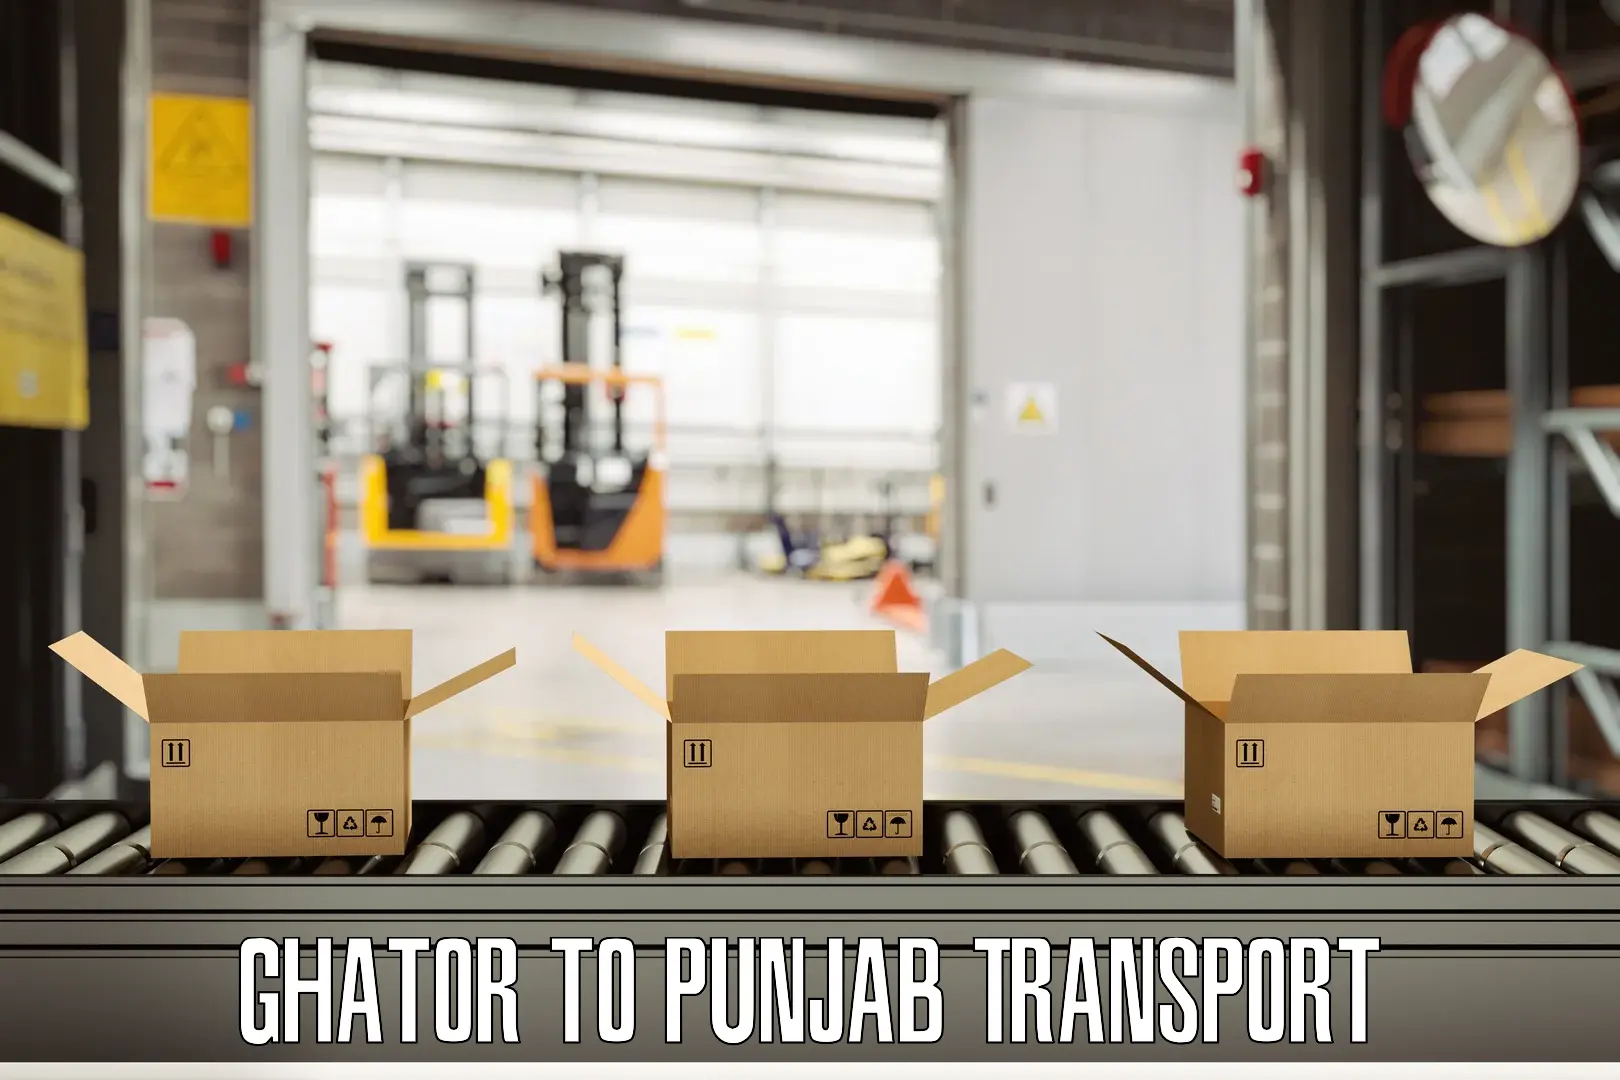 Road transport online services Ghator to Ludhiana